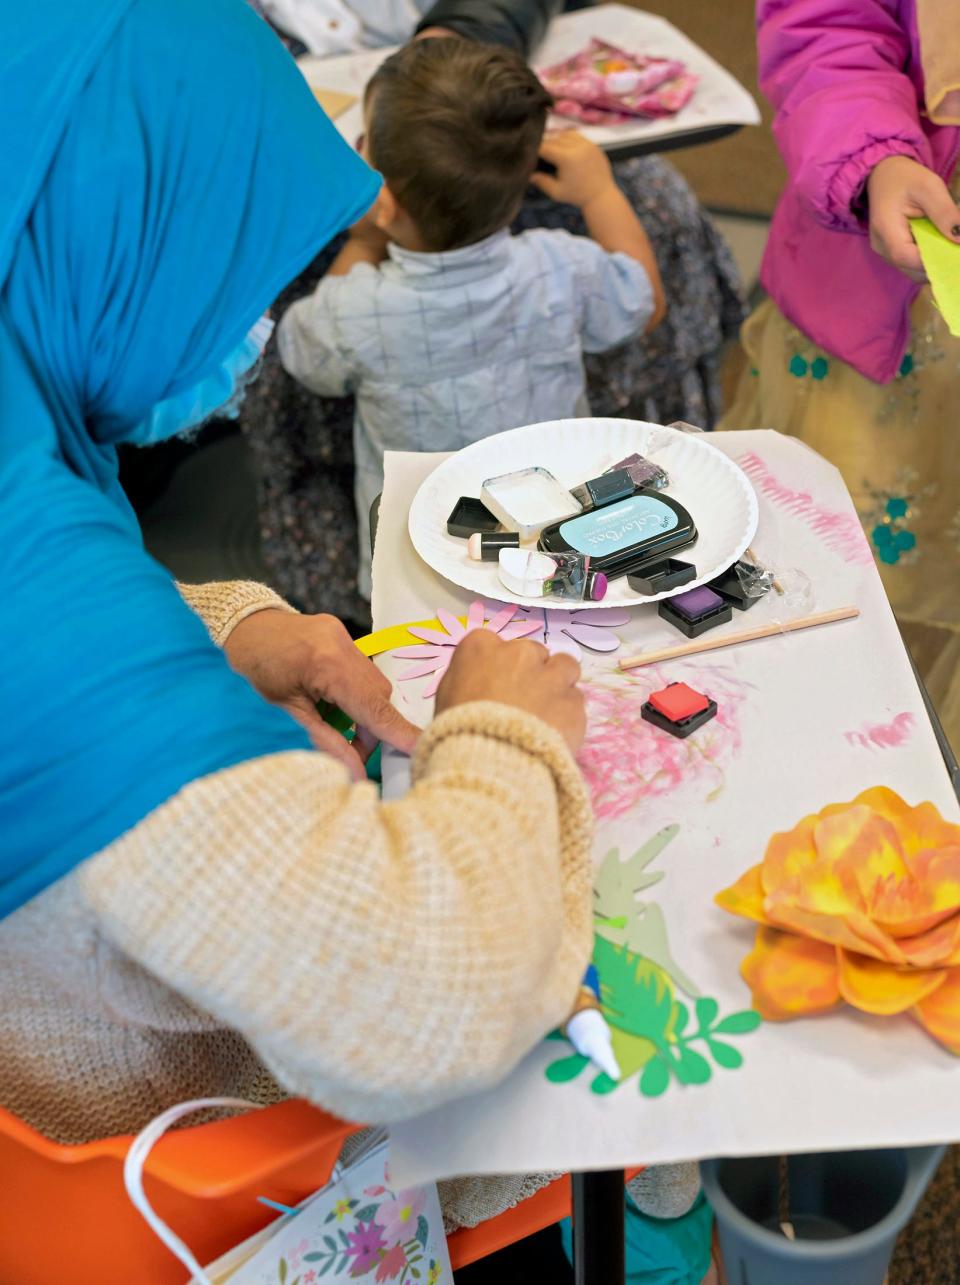 An Afghan refugee completes a Mother's Day craft project in partnership with the Stillwater Prairie Arts Center during an OSU CARES session on the Oklahoma State University campus in Stillwater.